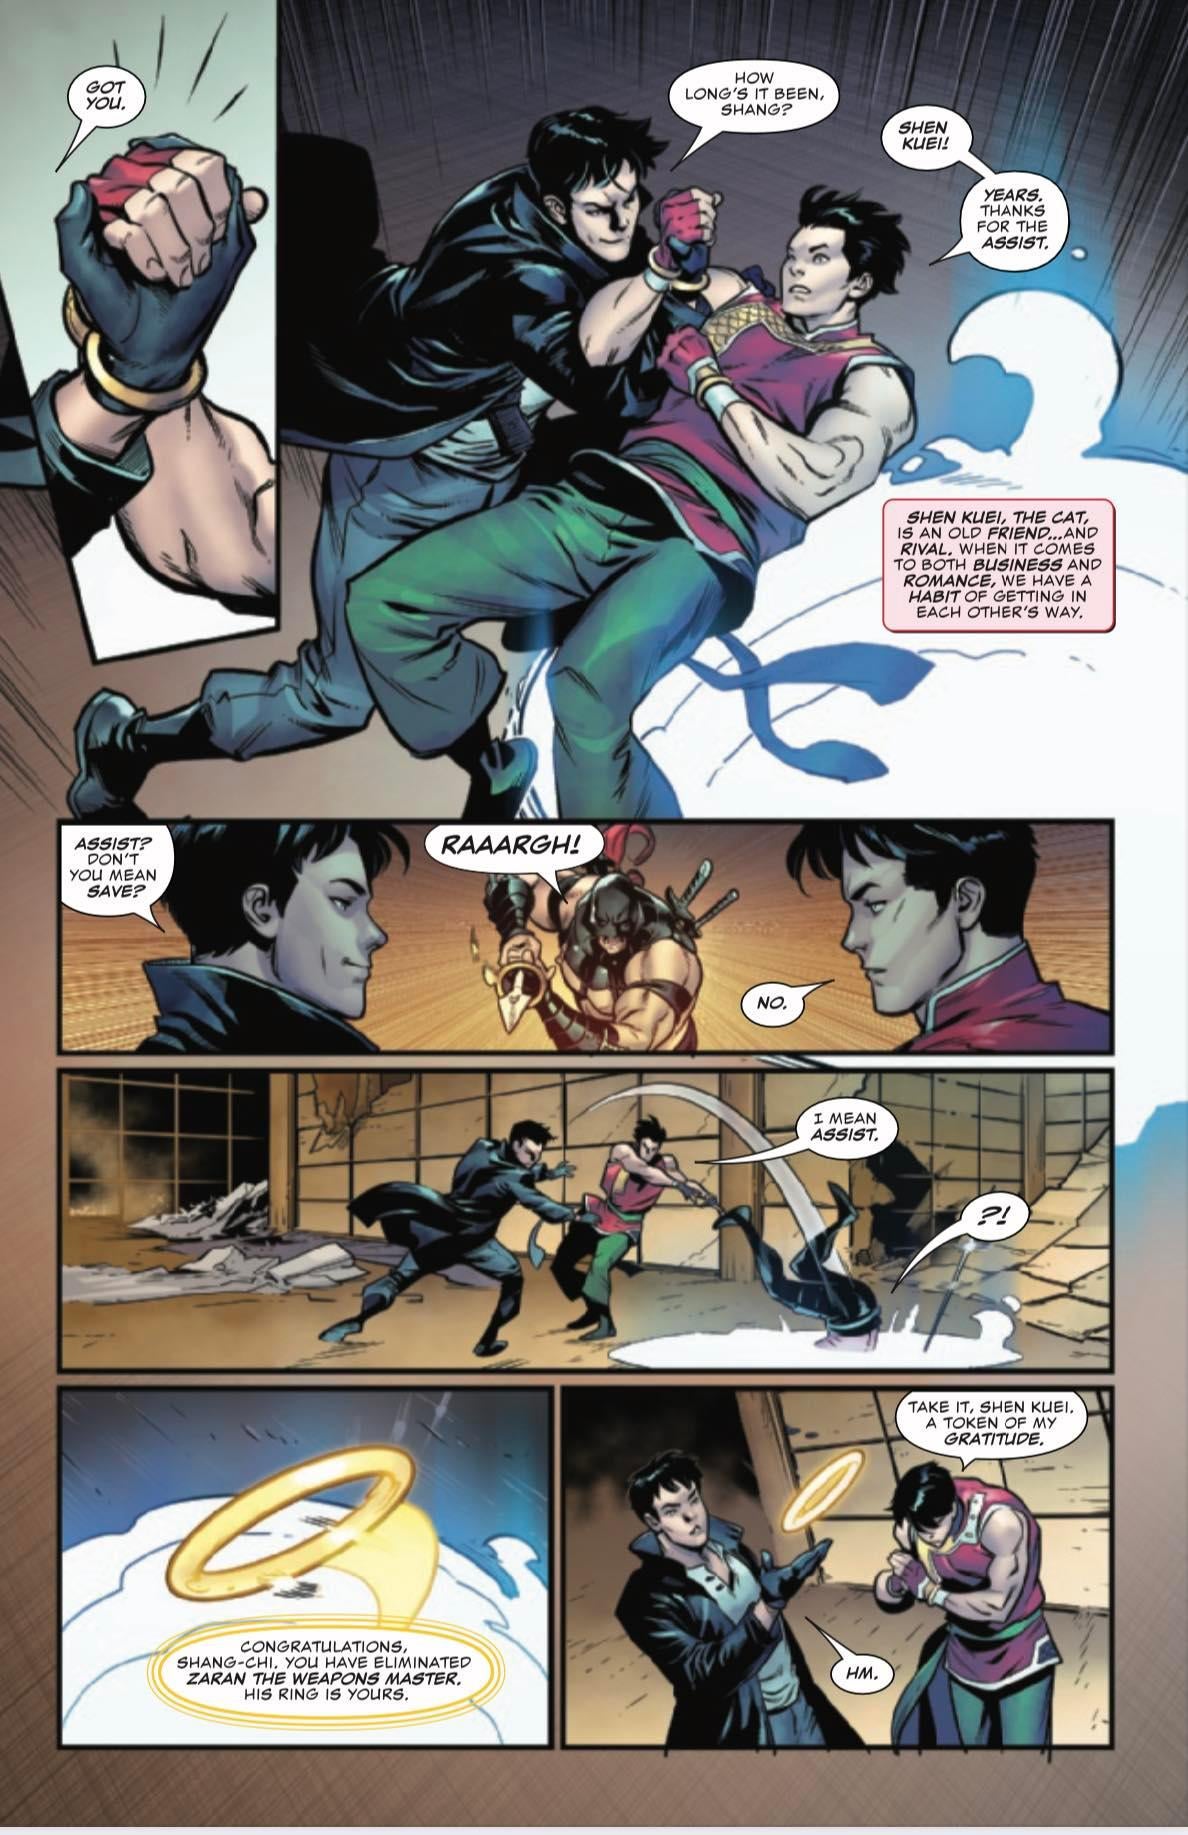 The Cat and Shang-Chi reunite (art by Marcus To)